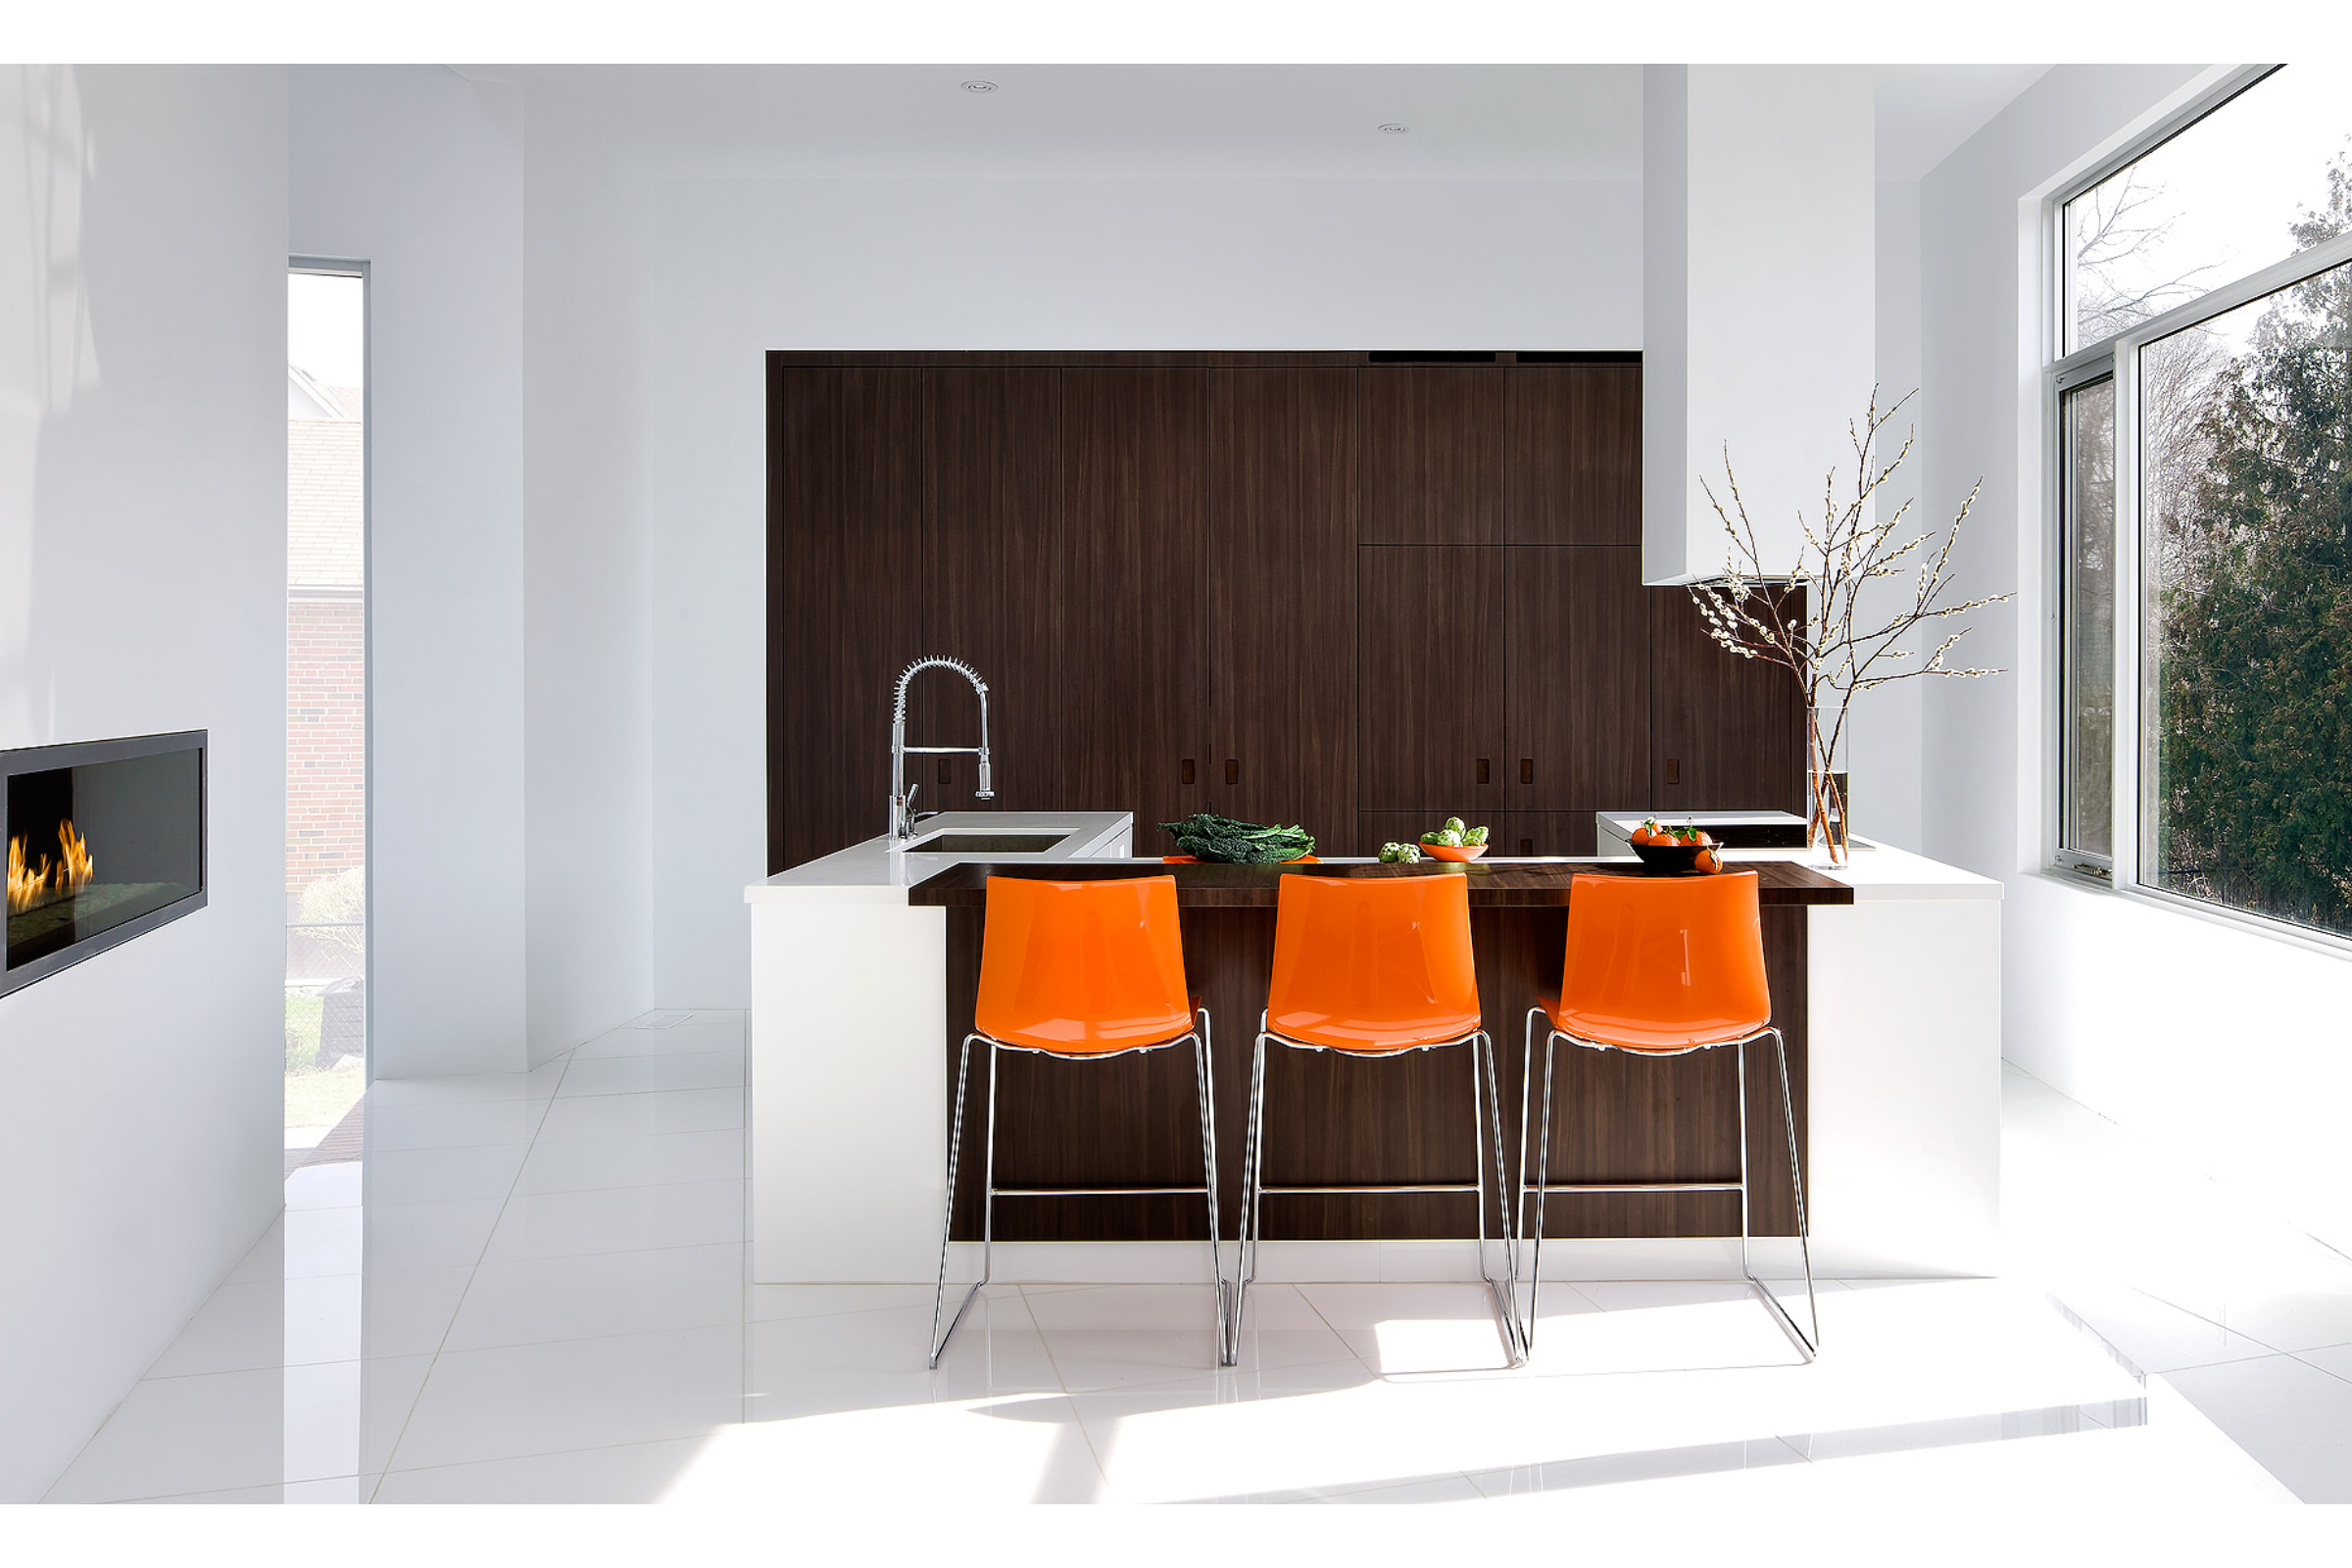 an interior photograph of a minimalist styled kitchen with vibrant orange chairs